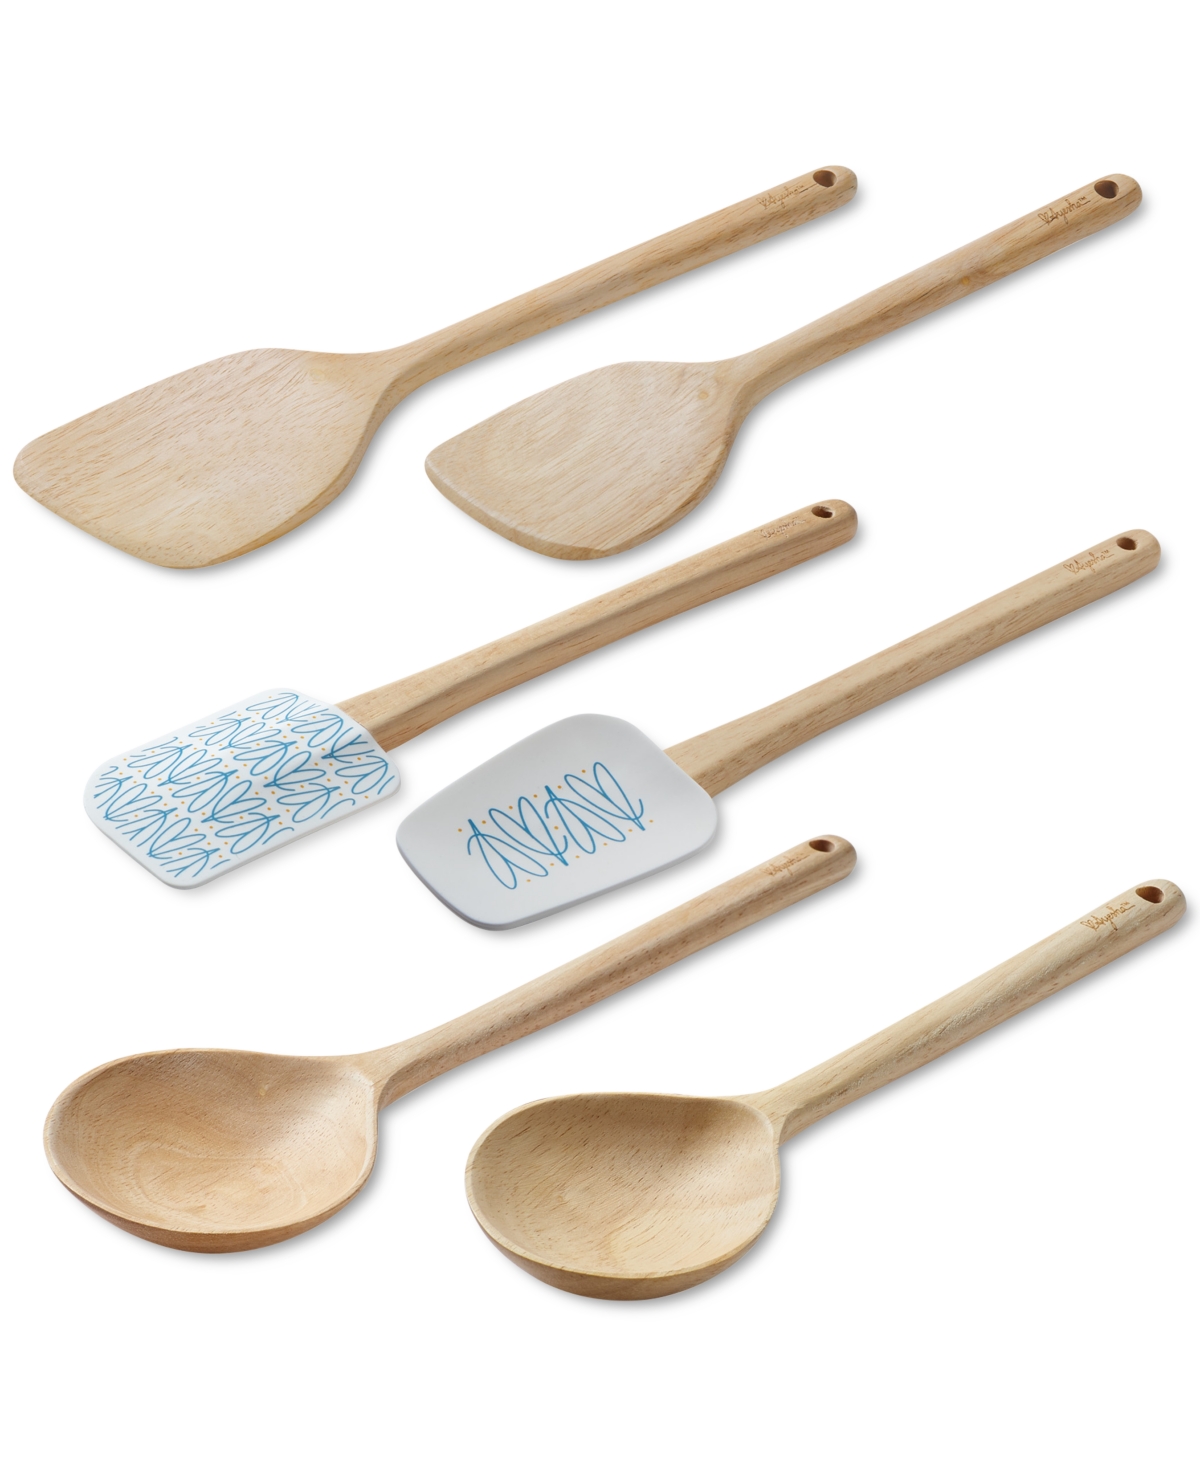 Ayesha Curry Kitchen Tools & Gadgets, Set of 6